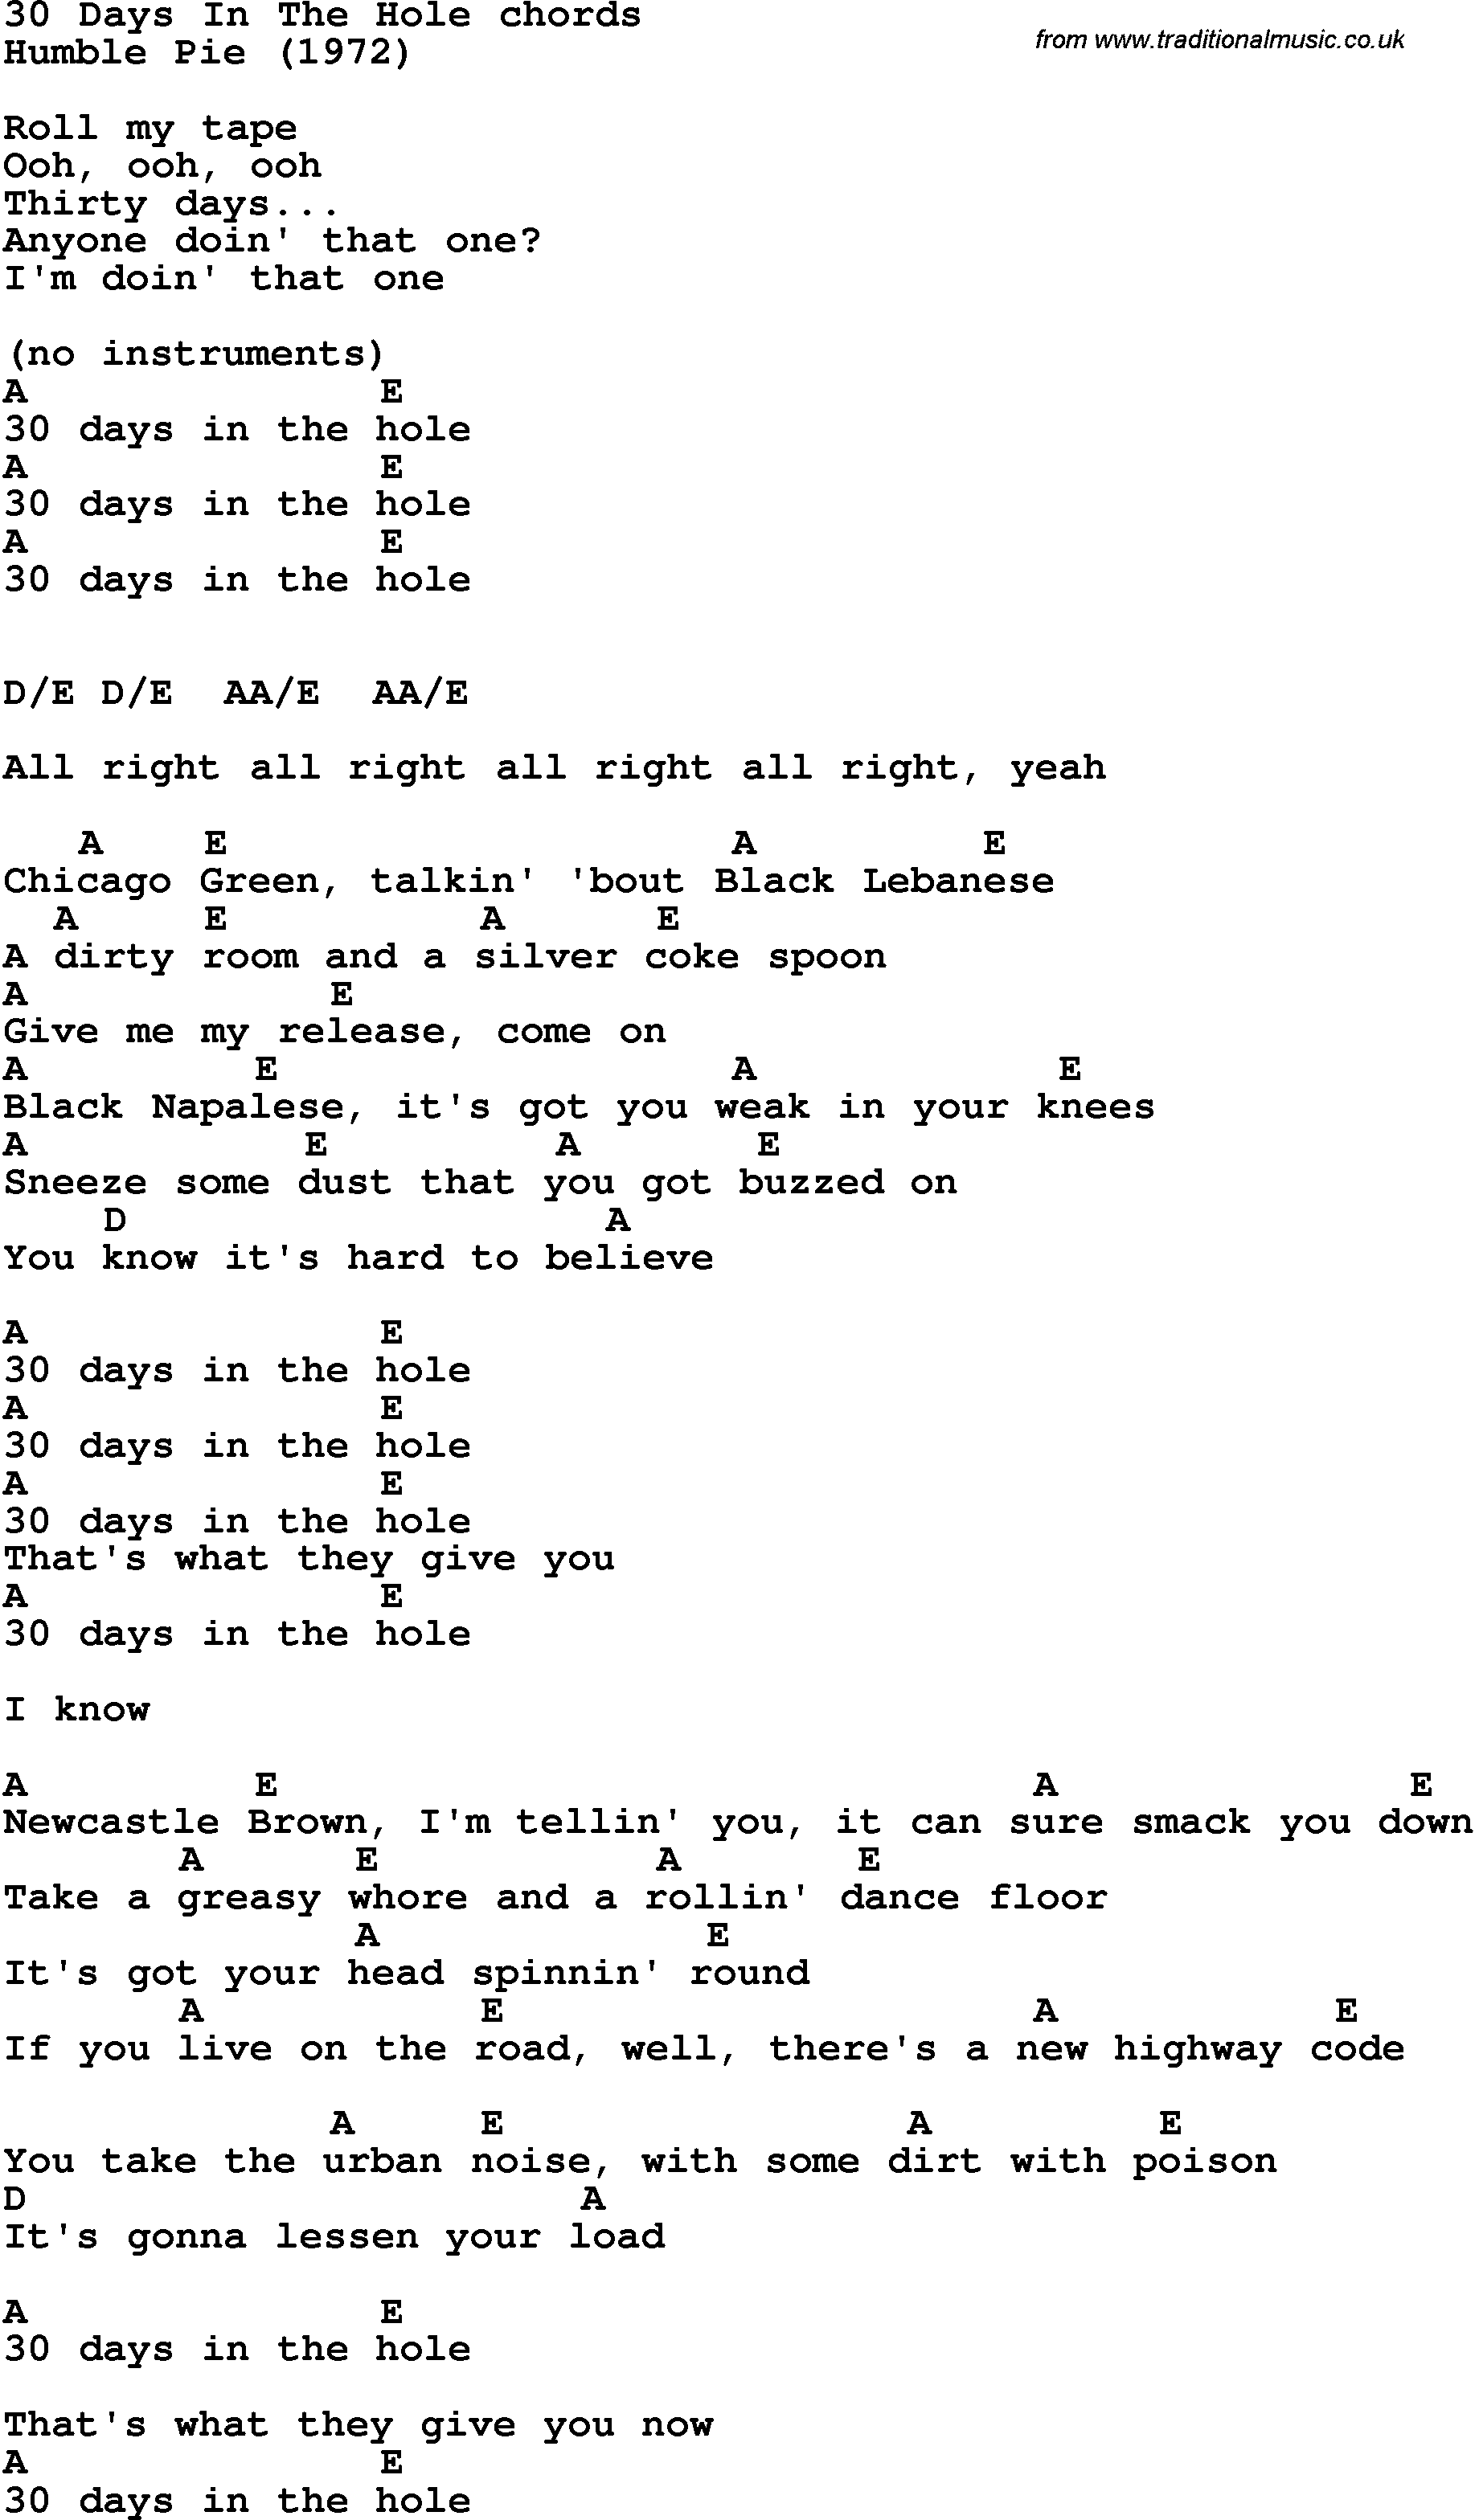 Song Lyrics with guitar chords for 30 Days In The Hole